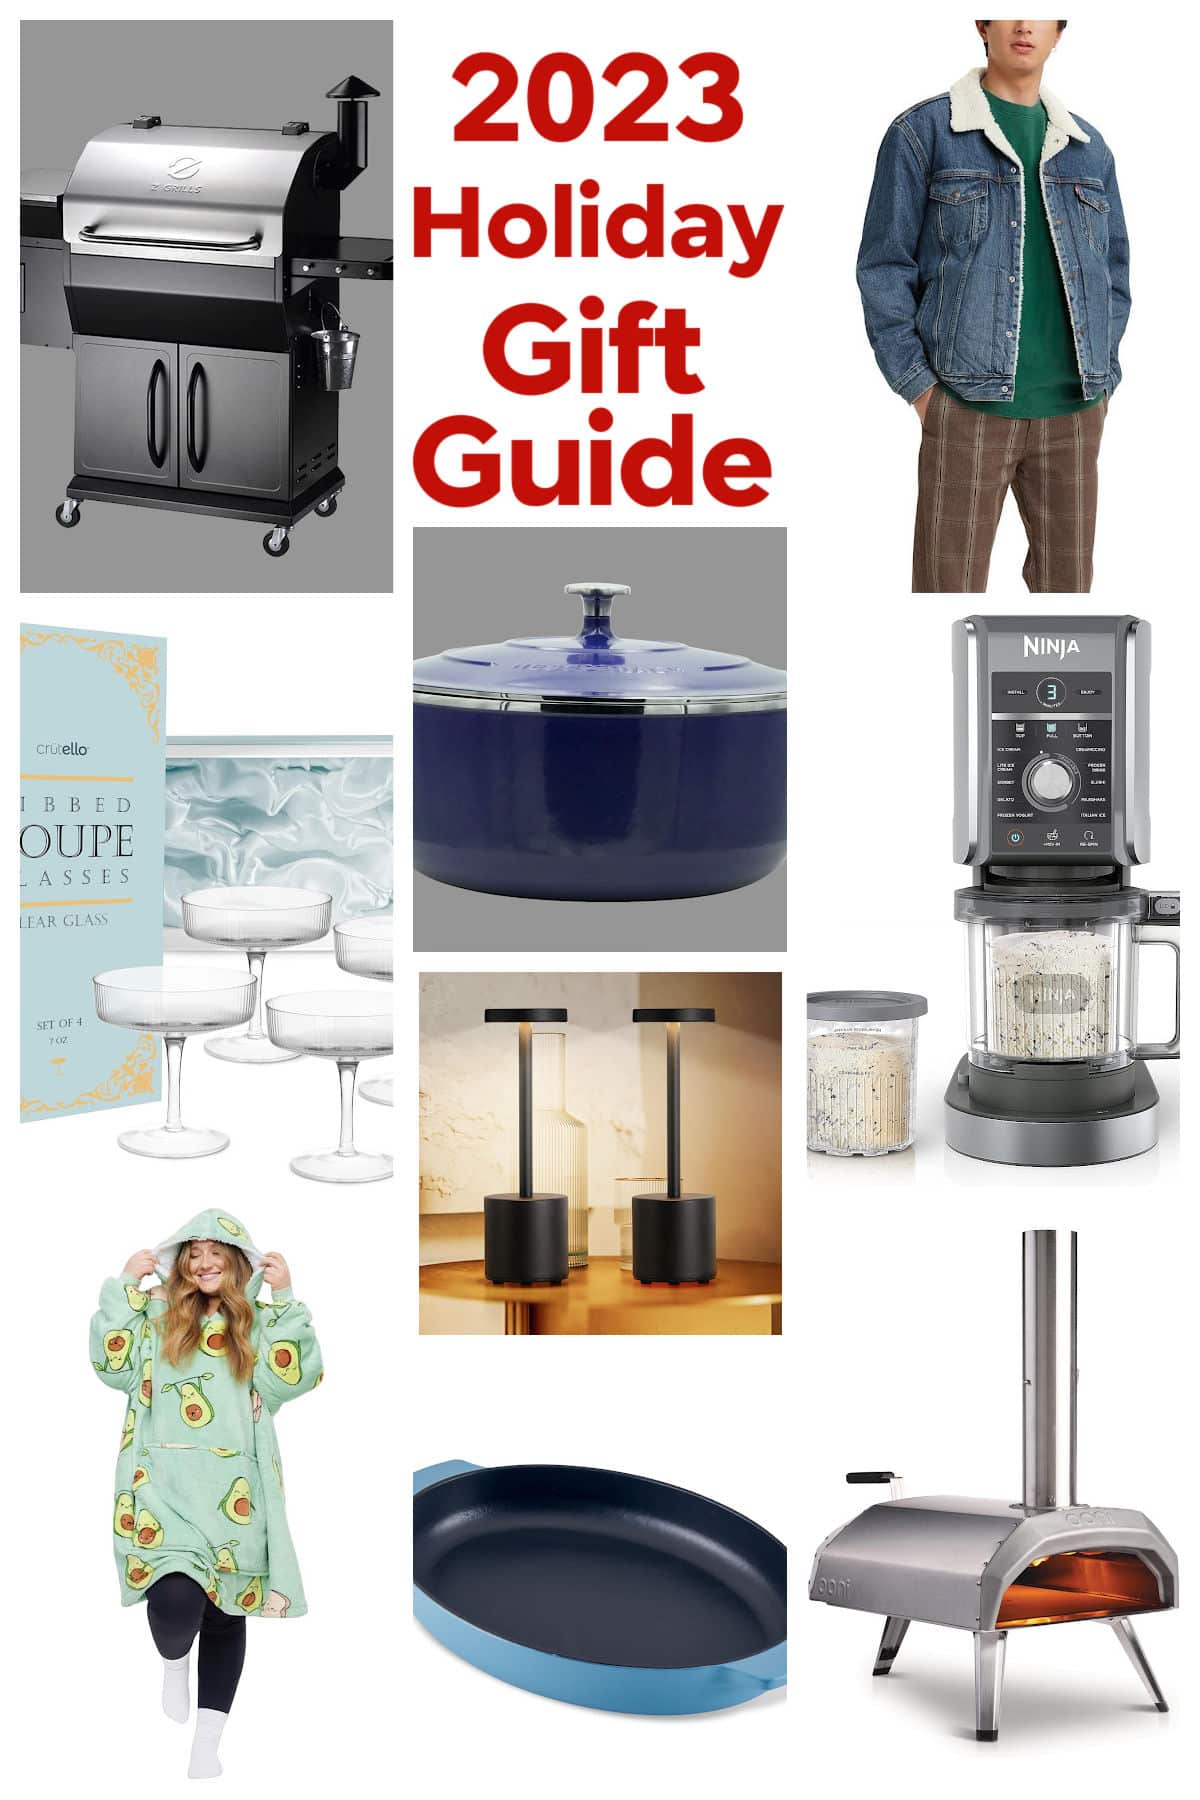 Collage holiday gift guide 2023.